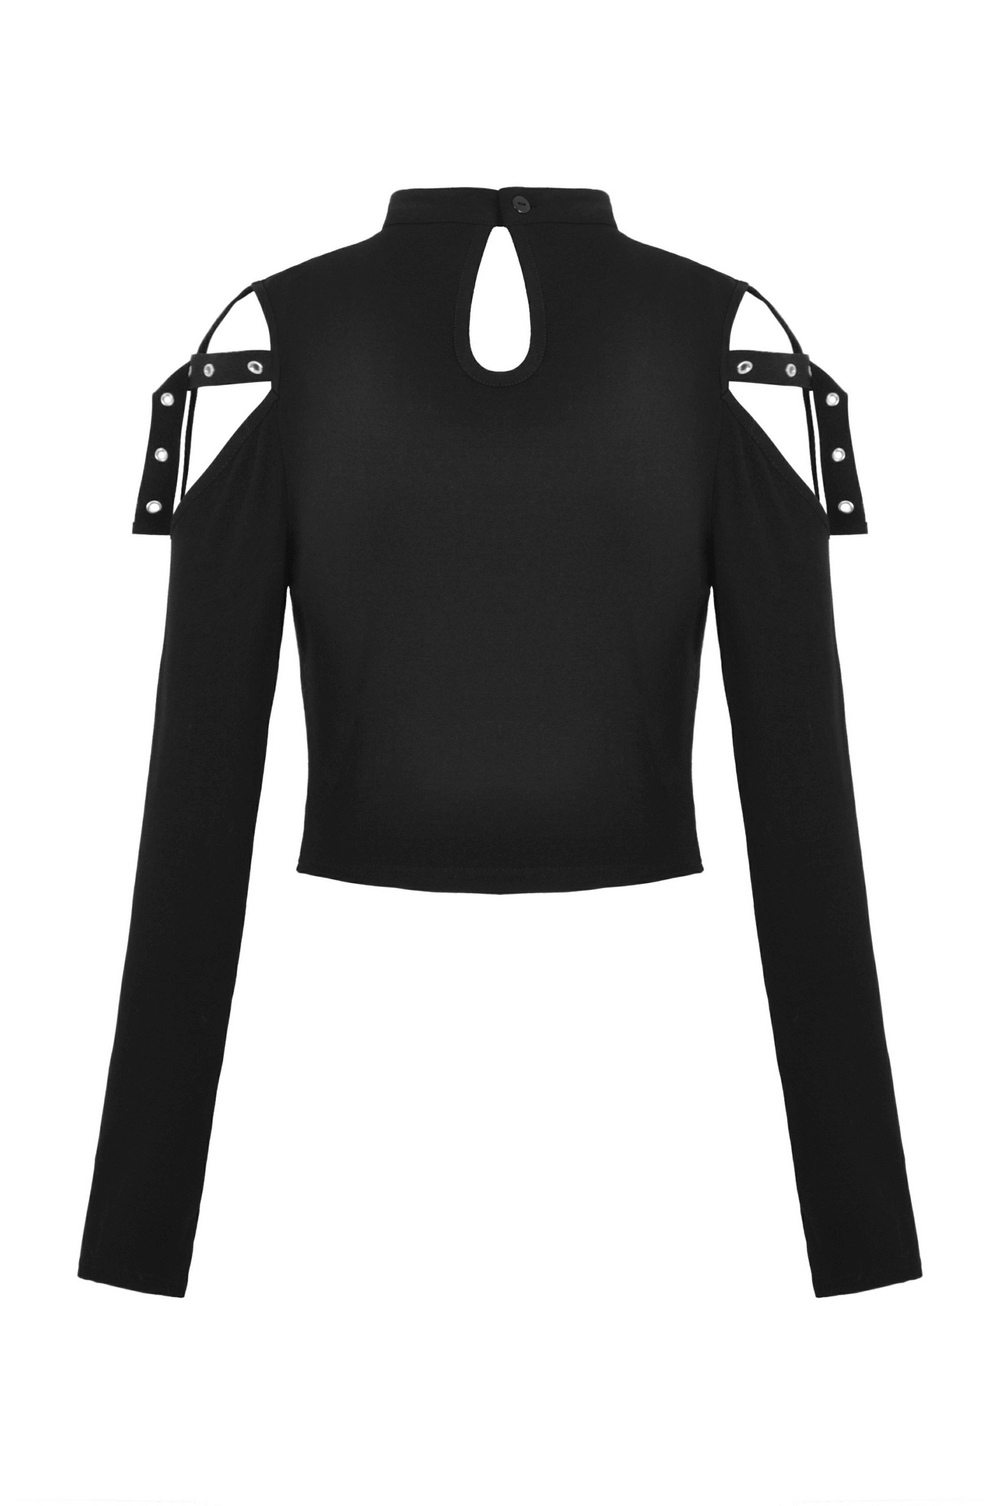 Gothic Black Lace-Up Crop Top with Cut-Out Details